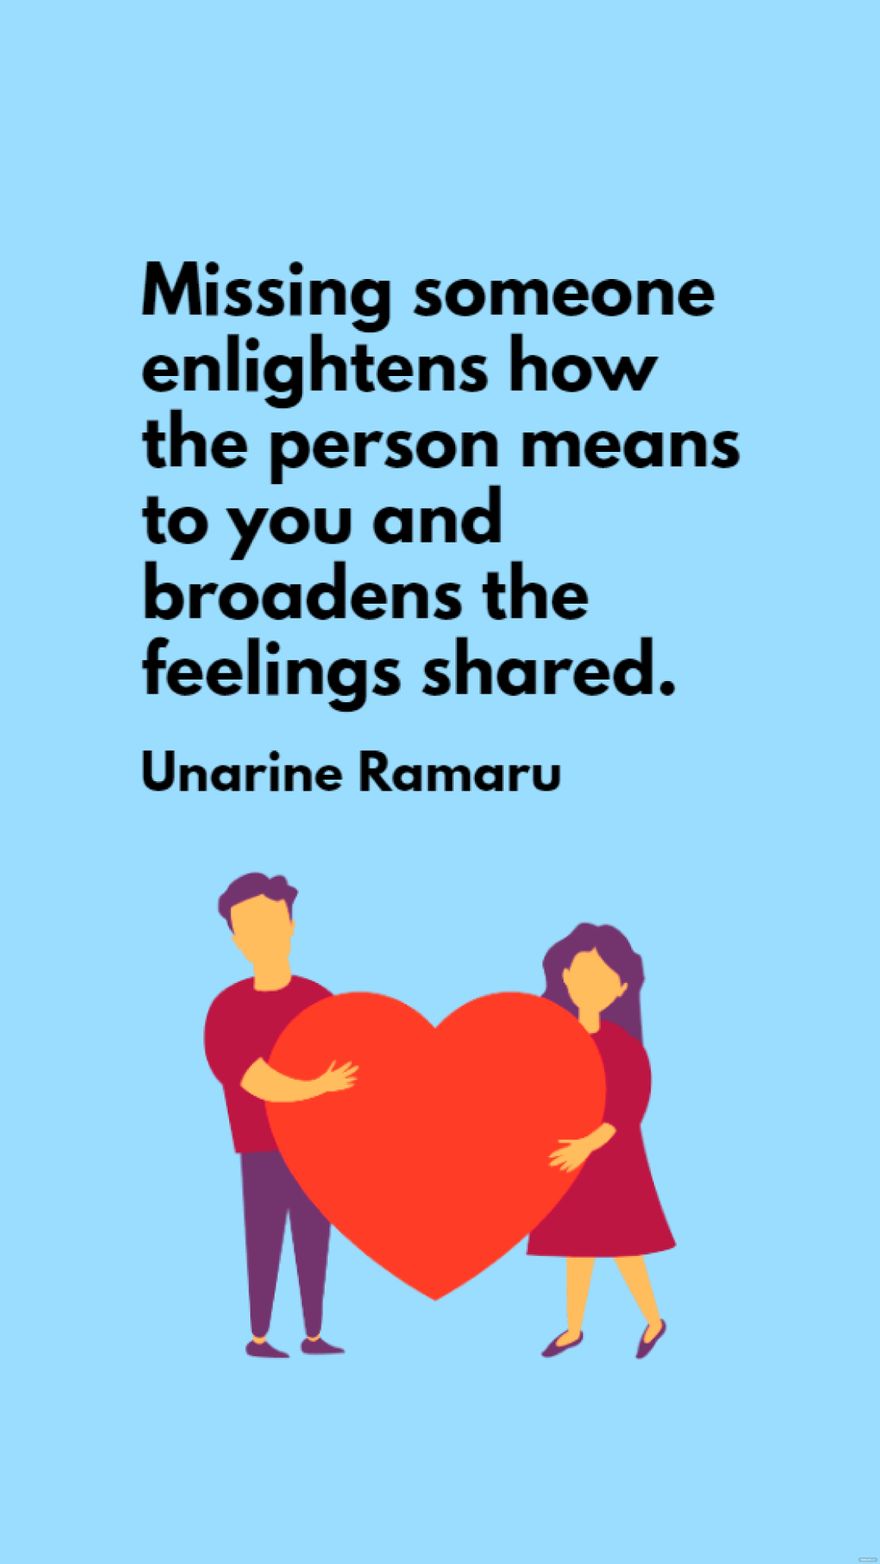 Unarine Ramaru - Missing someone enlightens how the person means to you and broadens the feelings shared.